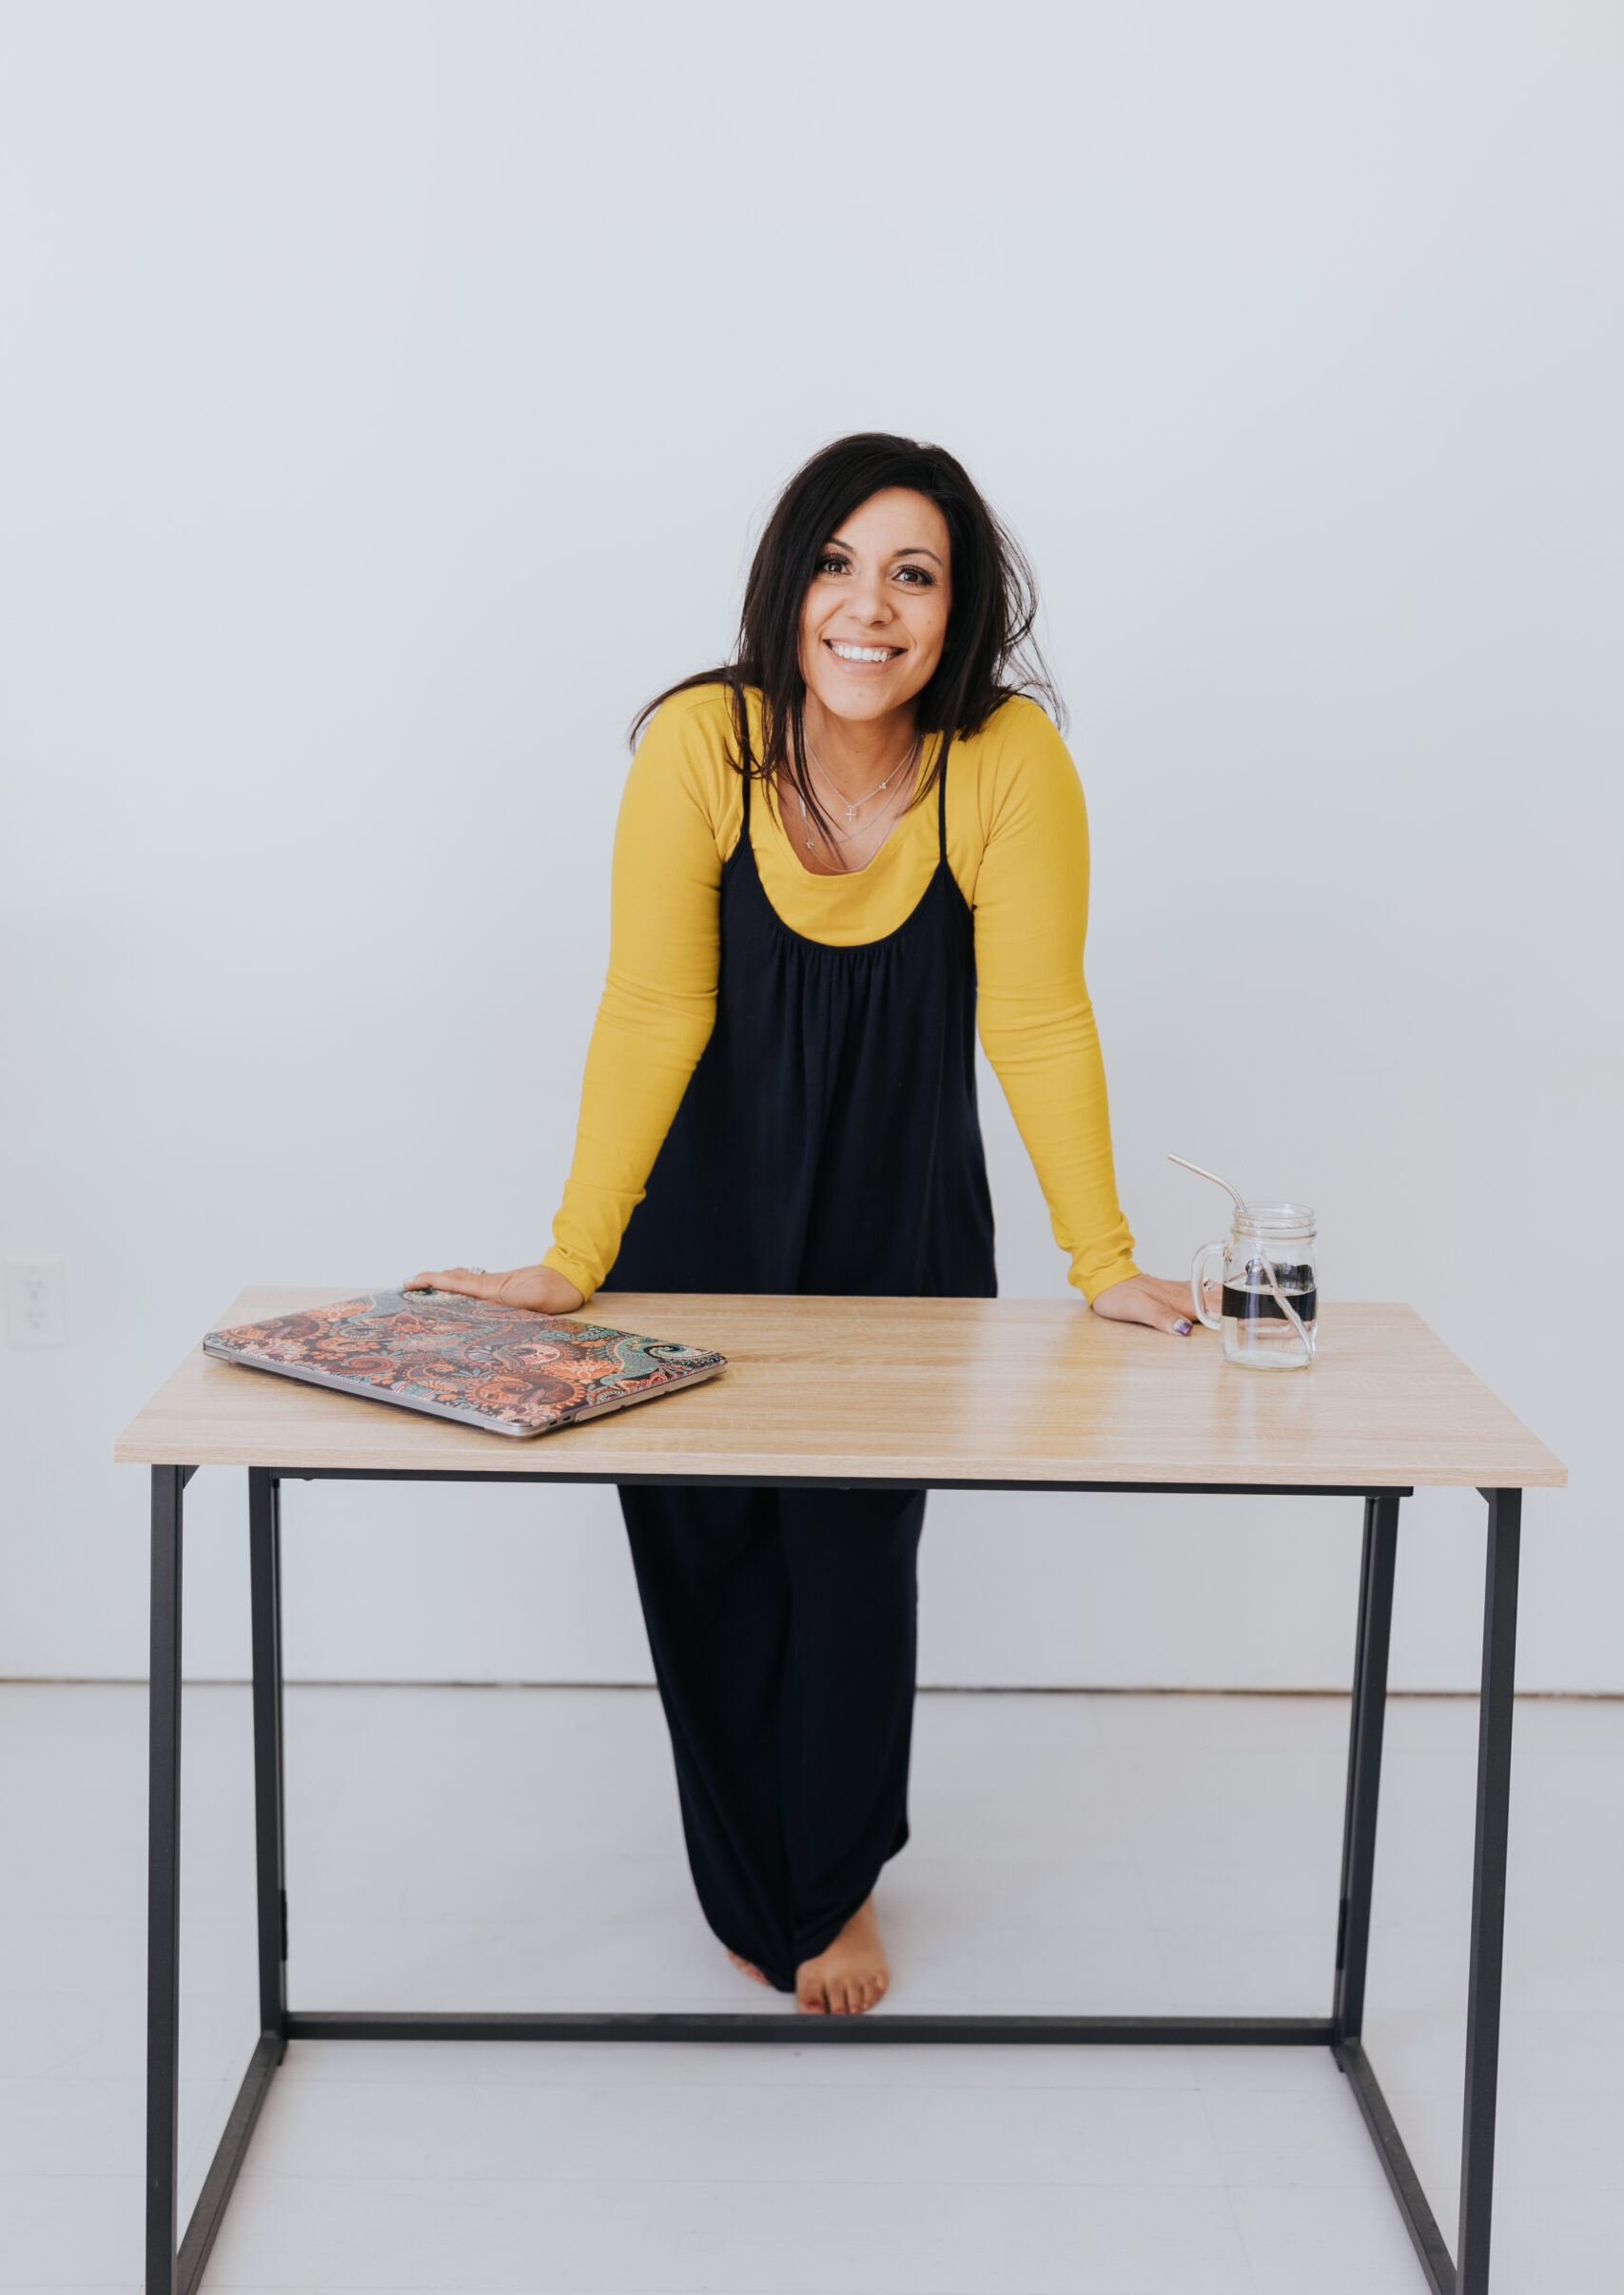 Photo of a dark haired woman standing behind a table with her laptop and a glass of water.